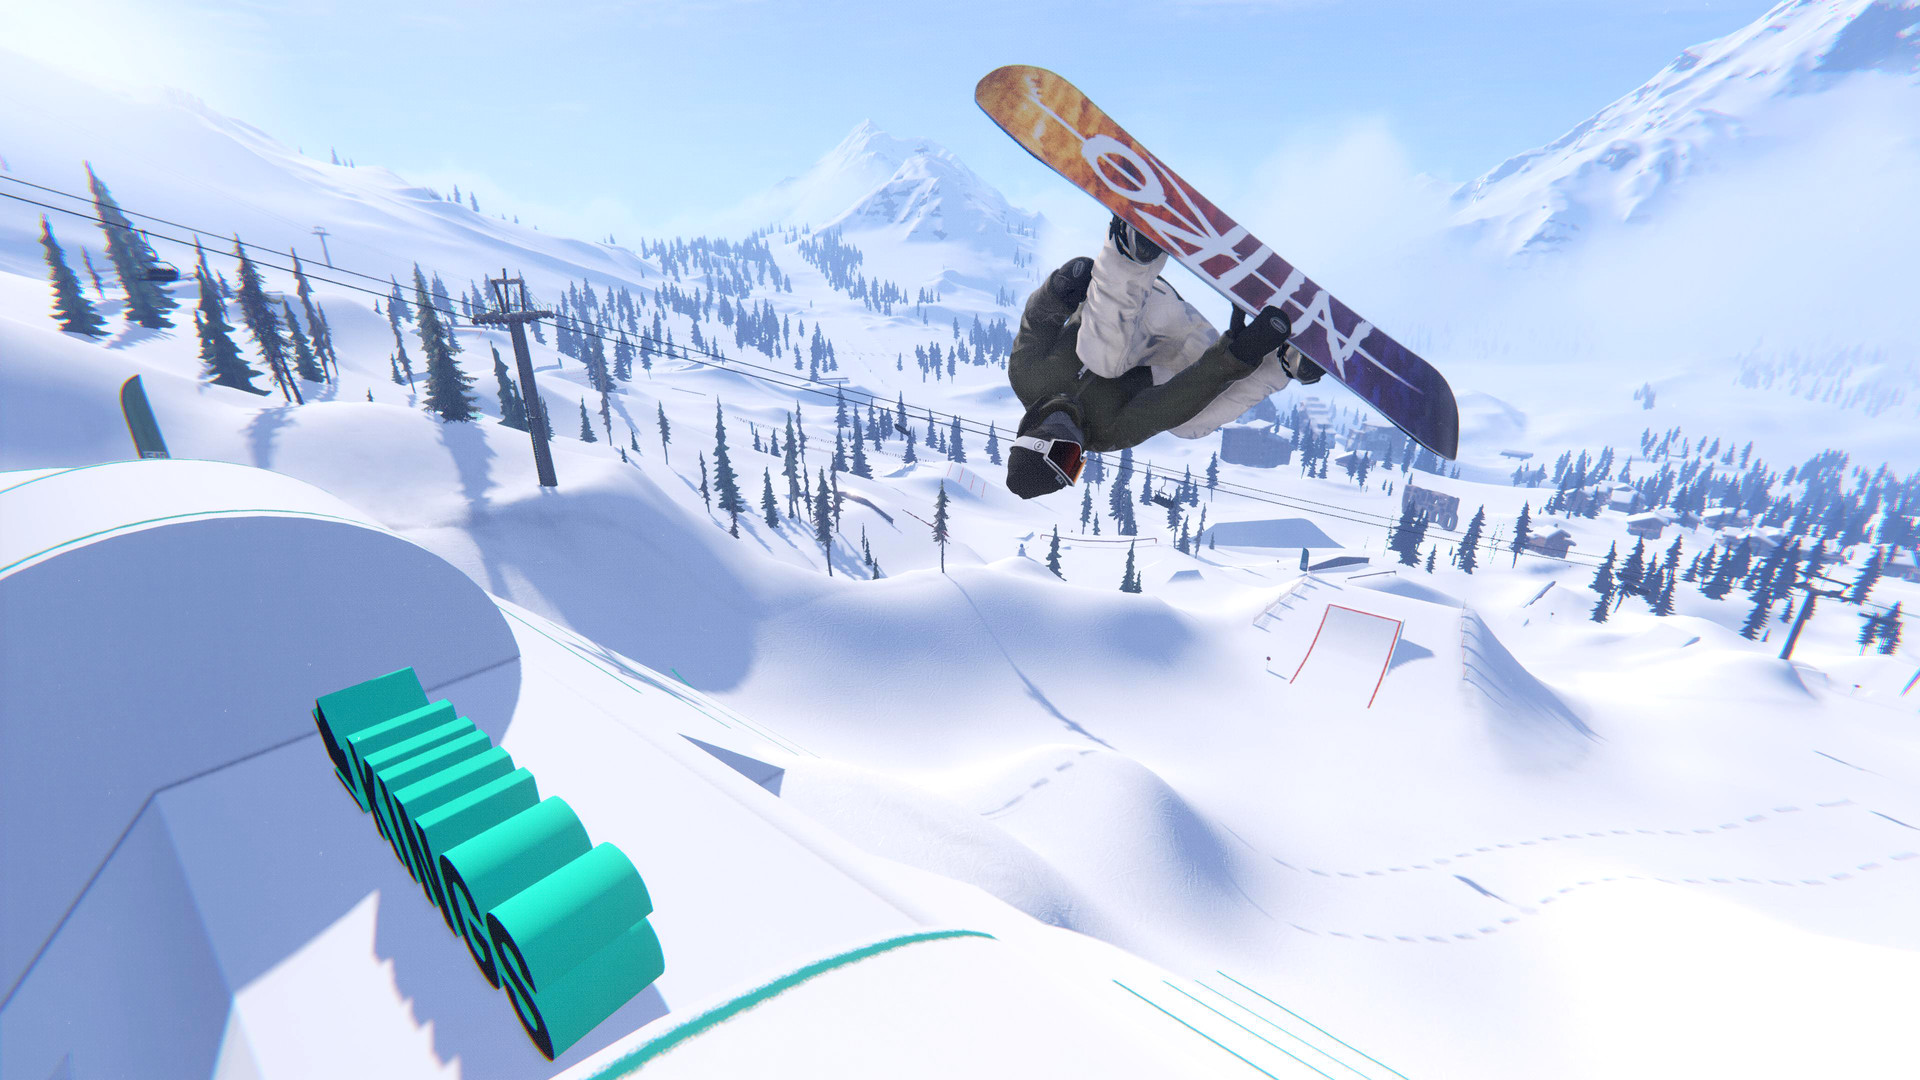  Forget SSX, indie snowboarders are carving the freshest mountain lines 